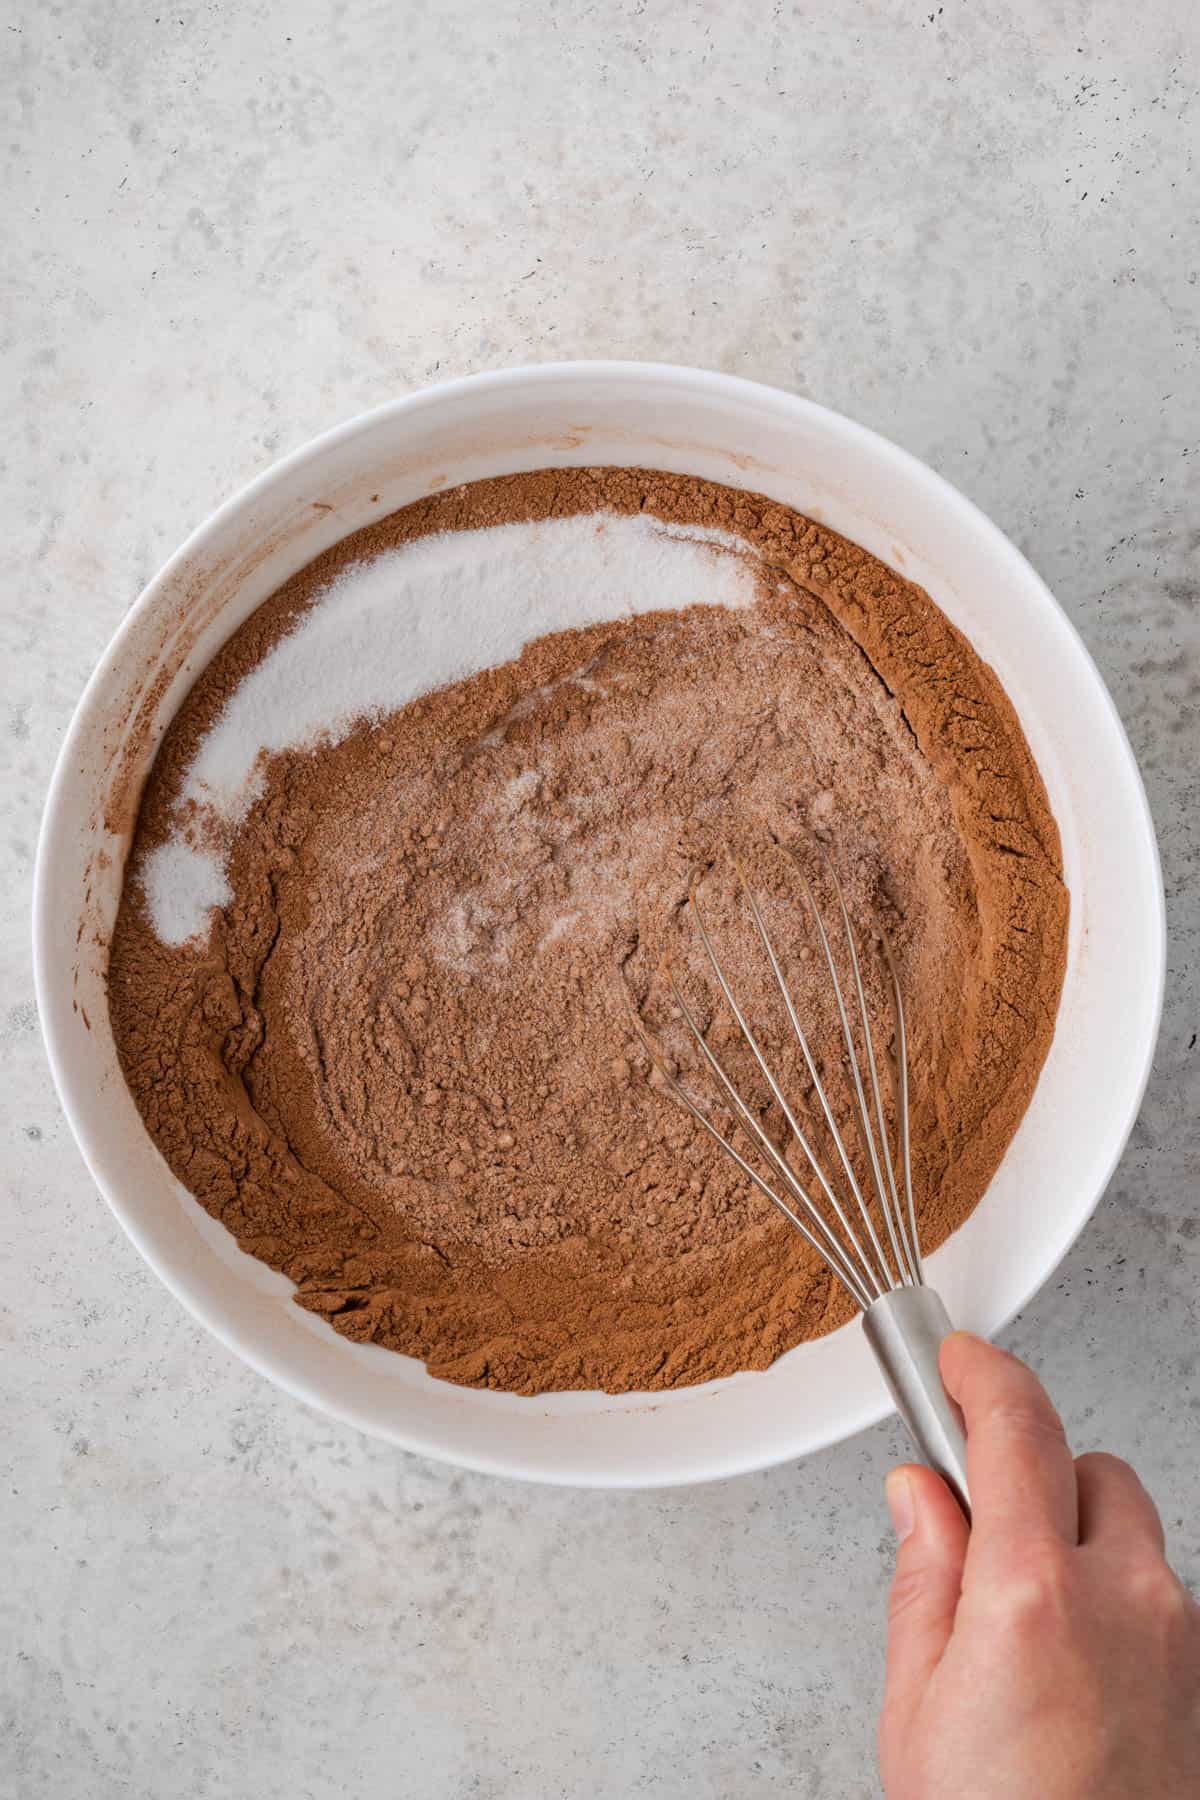 Sugar being whisked into the cocoa powder mixture.